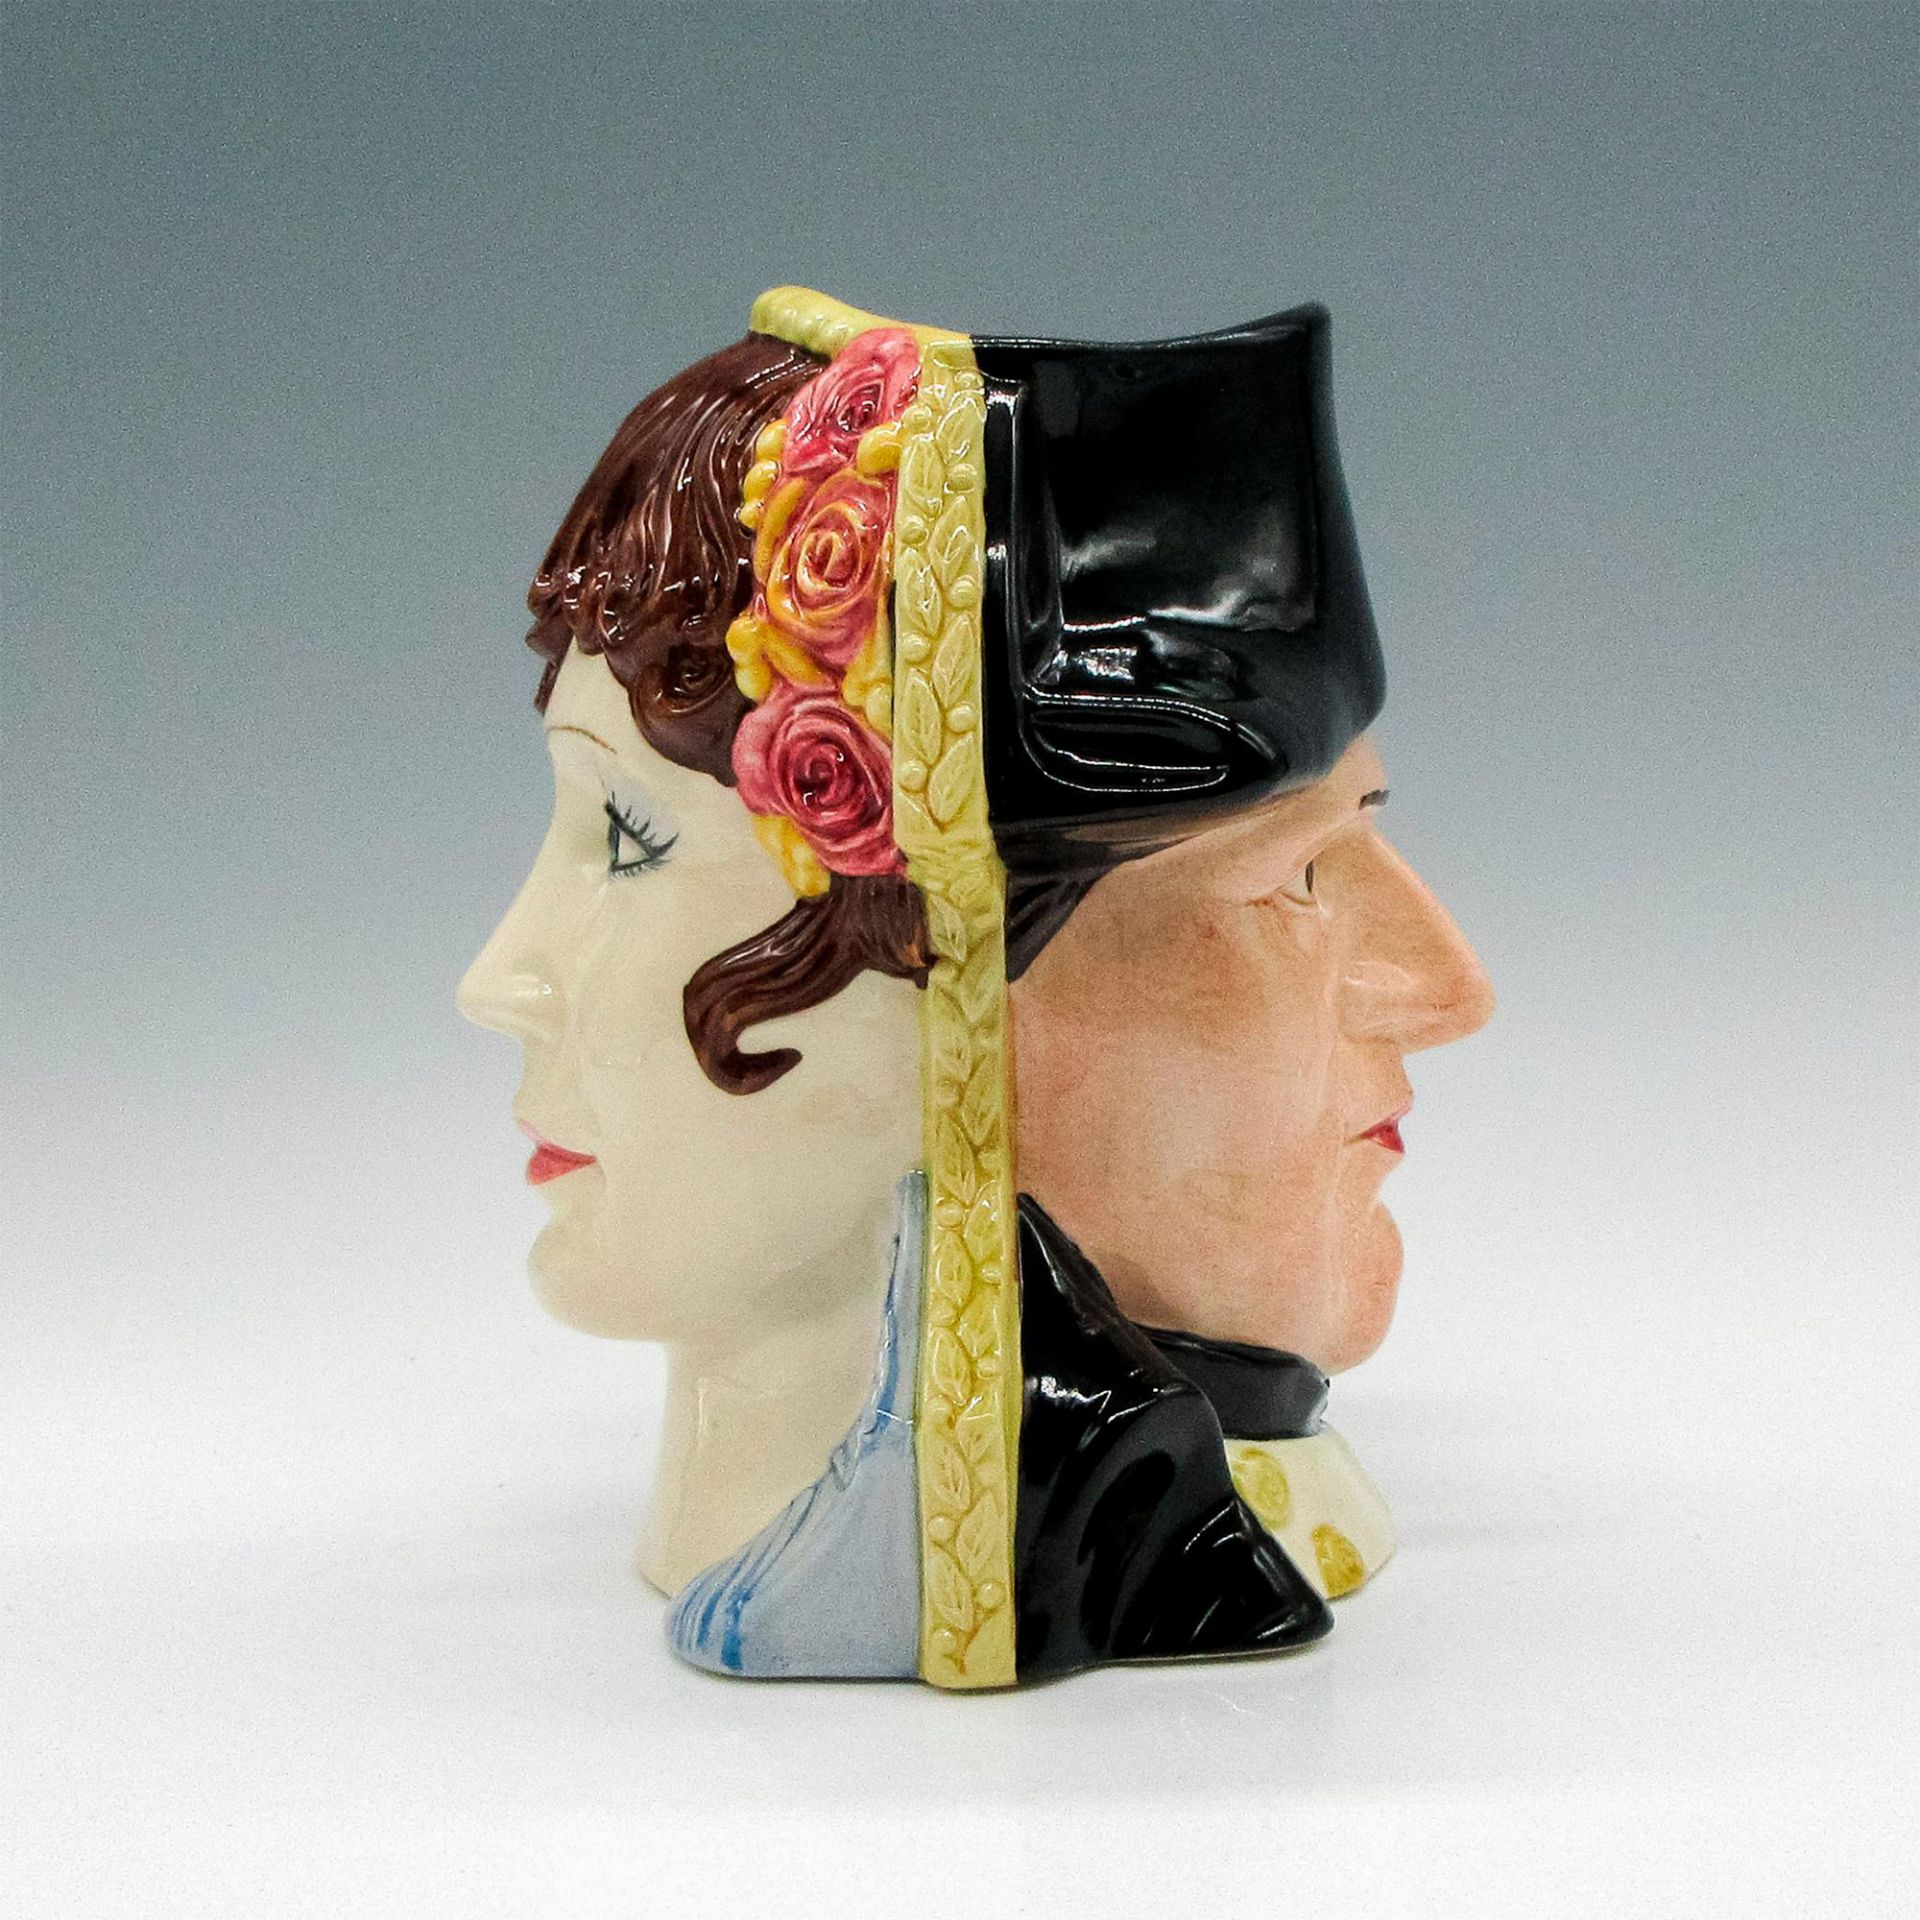 Napoleon and Josephine D6750 (Doublefaced) - Large - Royal Doulton Character Jug - Image 4 of 5